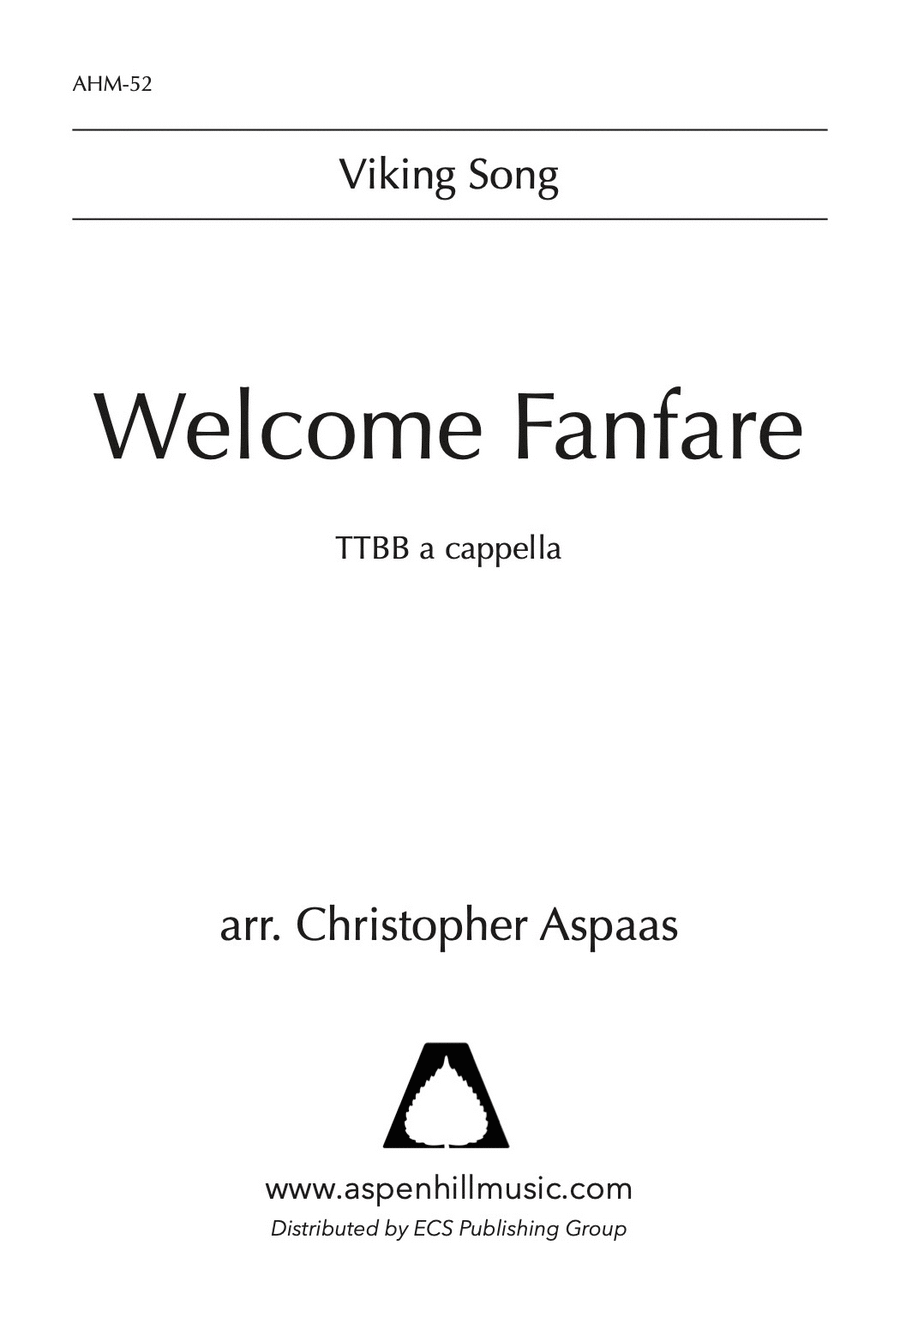 Welcome Fanfare!